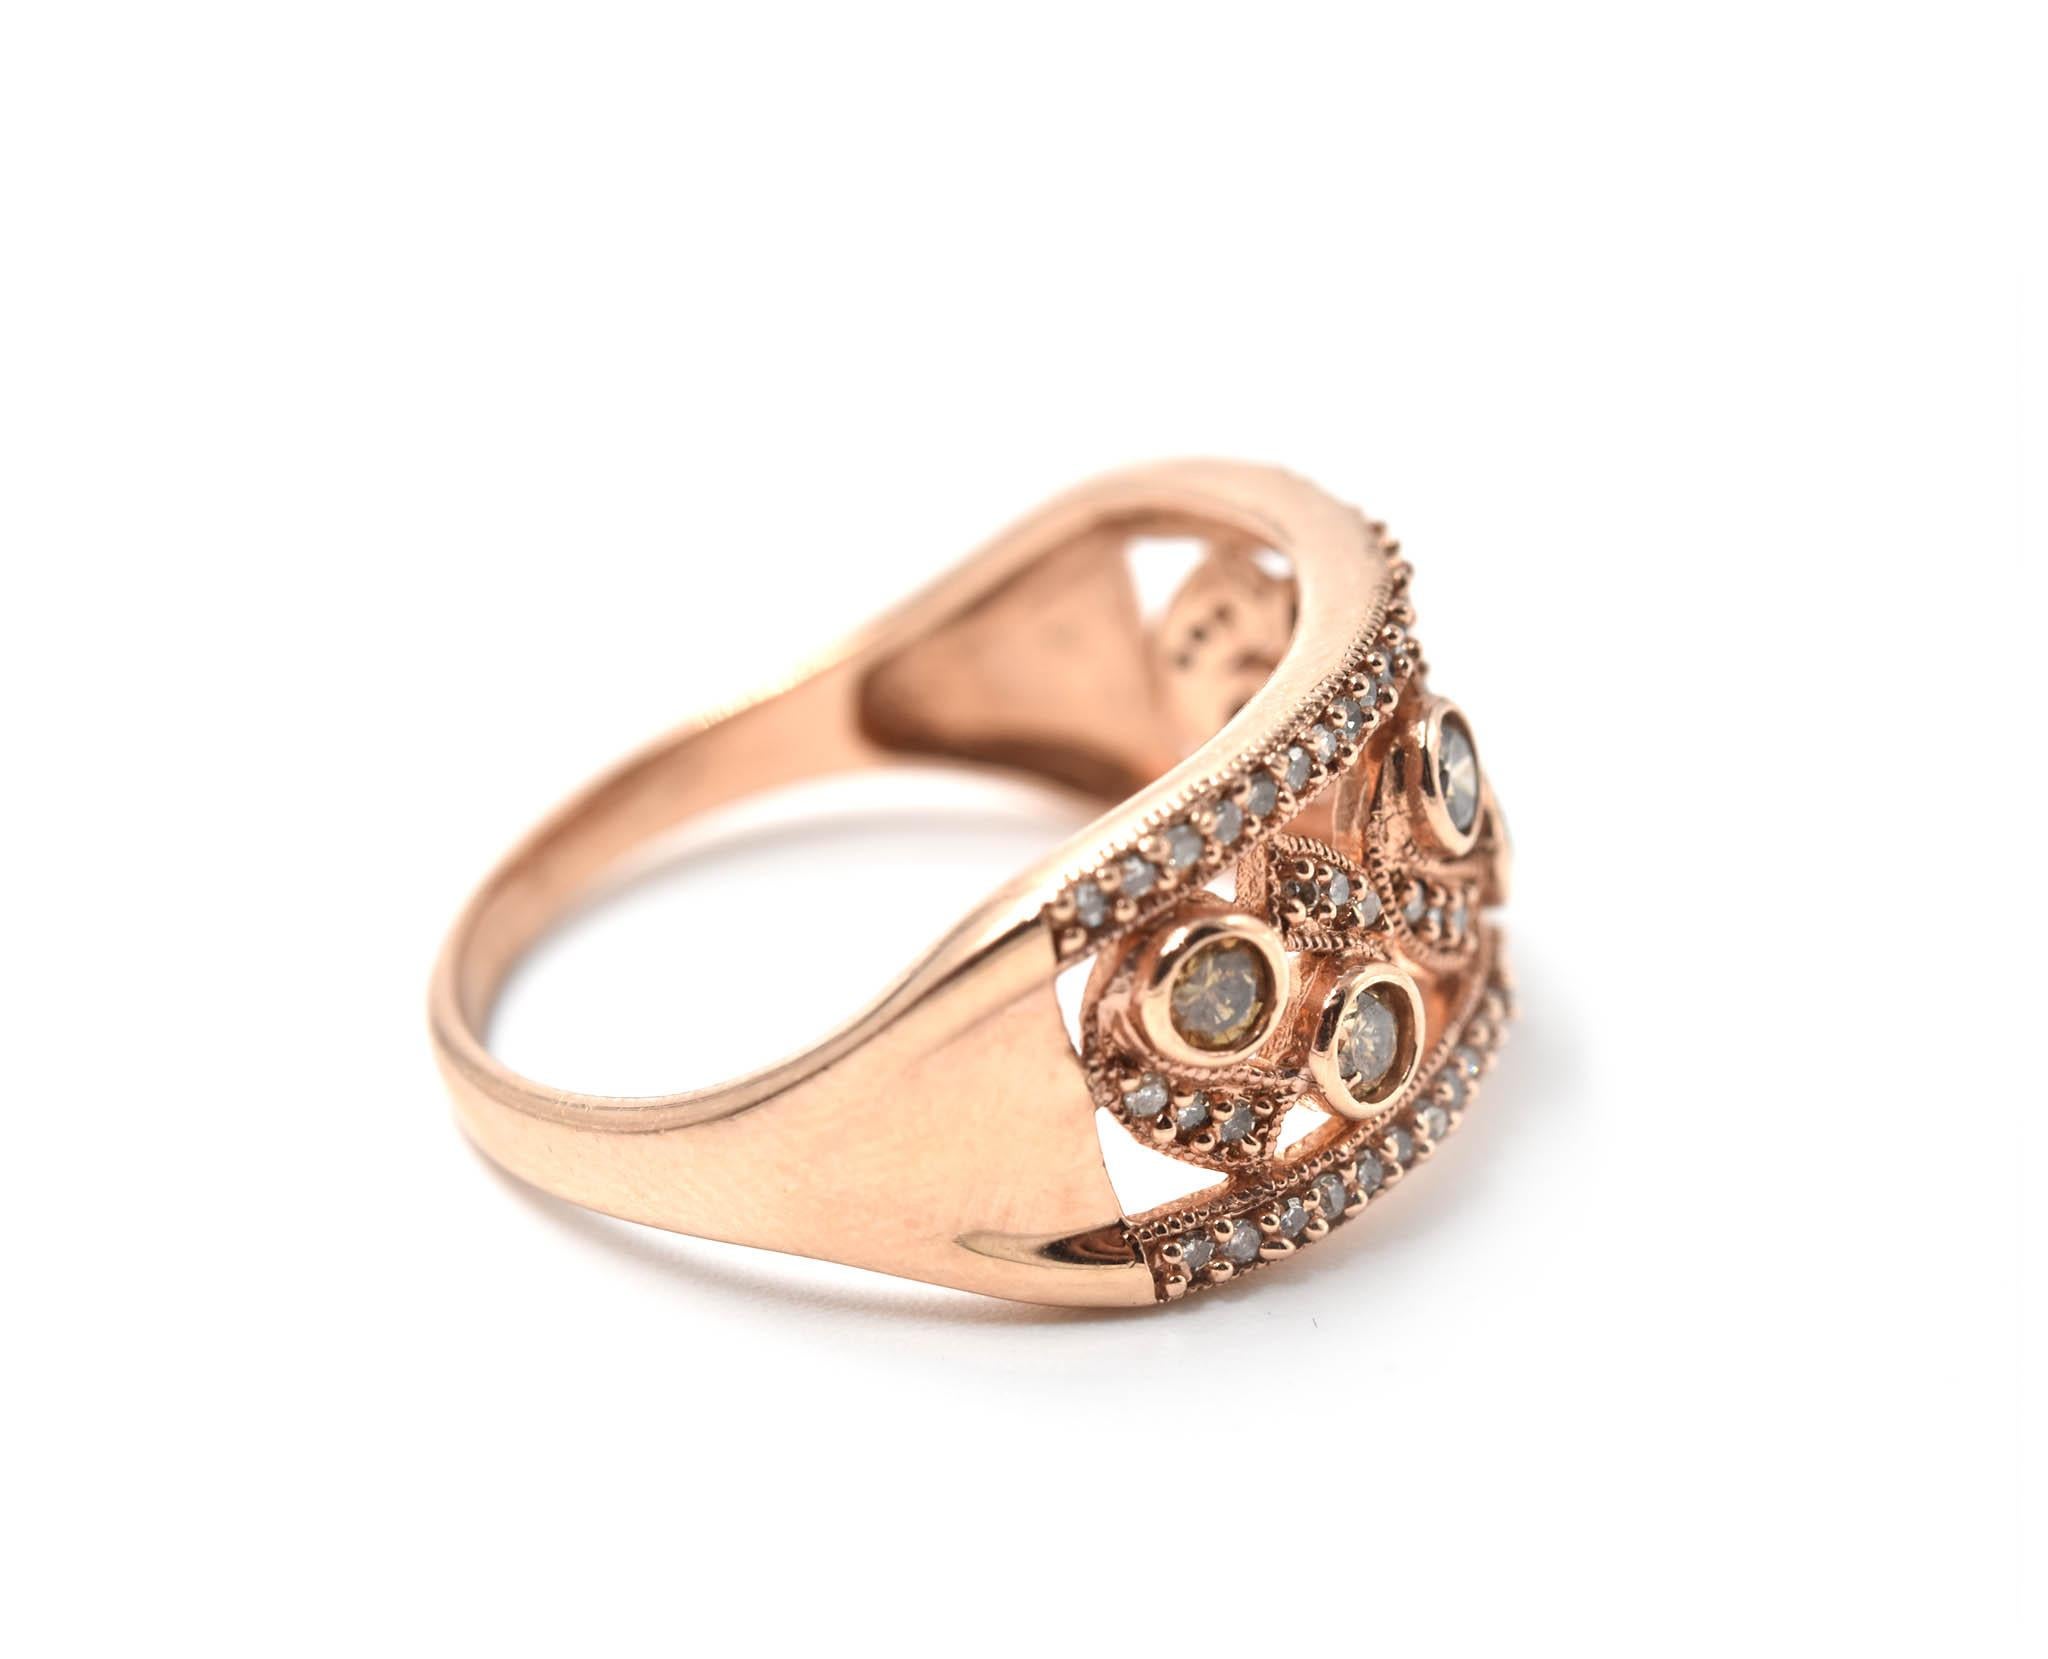 Designer: custom design
Material: 10k rose gold
Diamonds: 64 round brilliant cut diamonds = 0.50 carat weight
Ring size: 7 (please allow two additional shipping days for sizing requests)
Weight: 2.8 grams 
